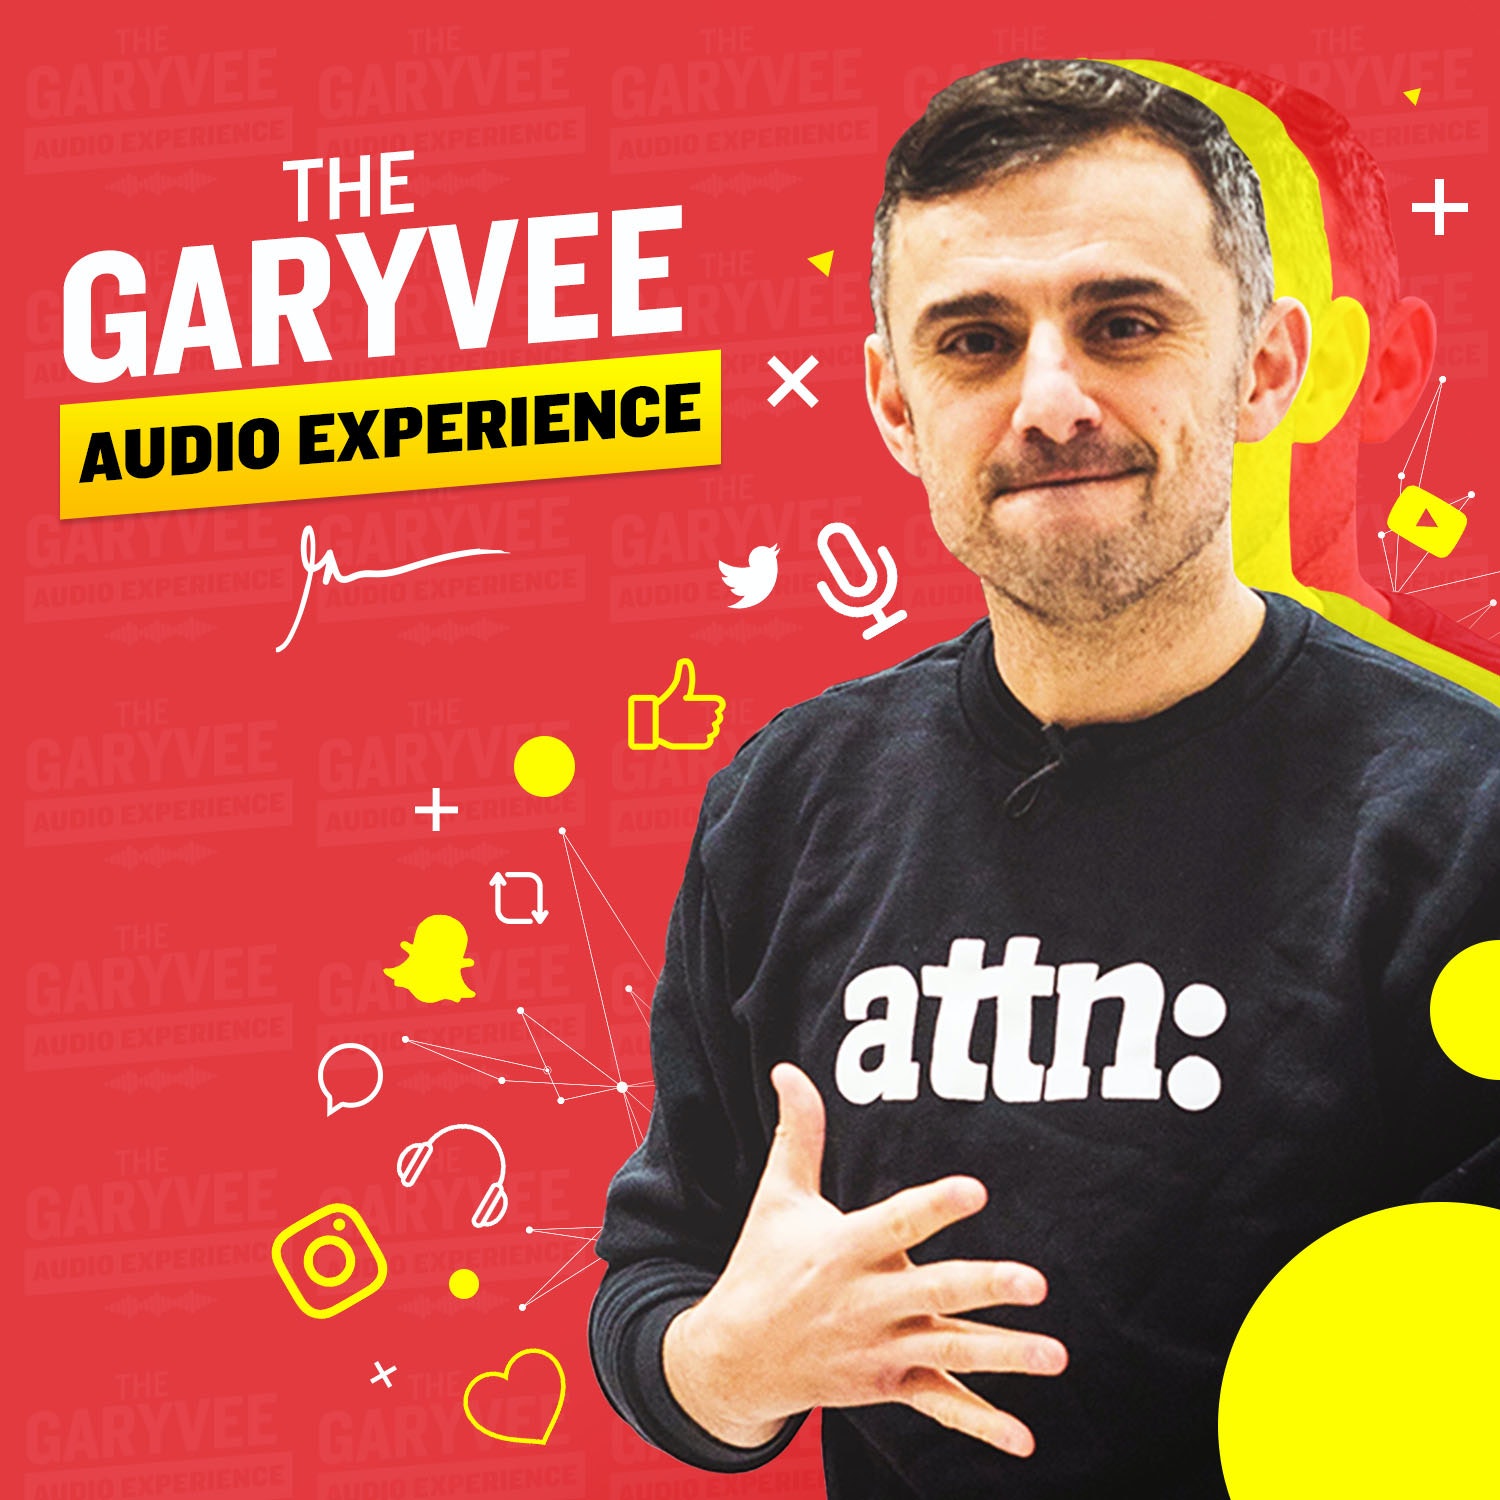 Motivational Podcasts: The Garyvee Audio Experience